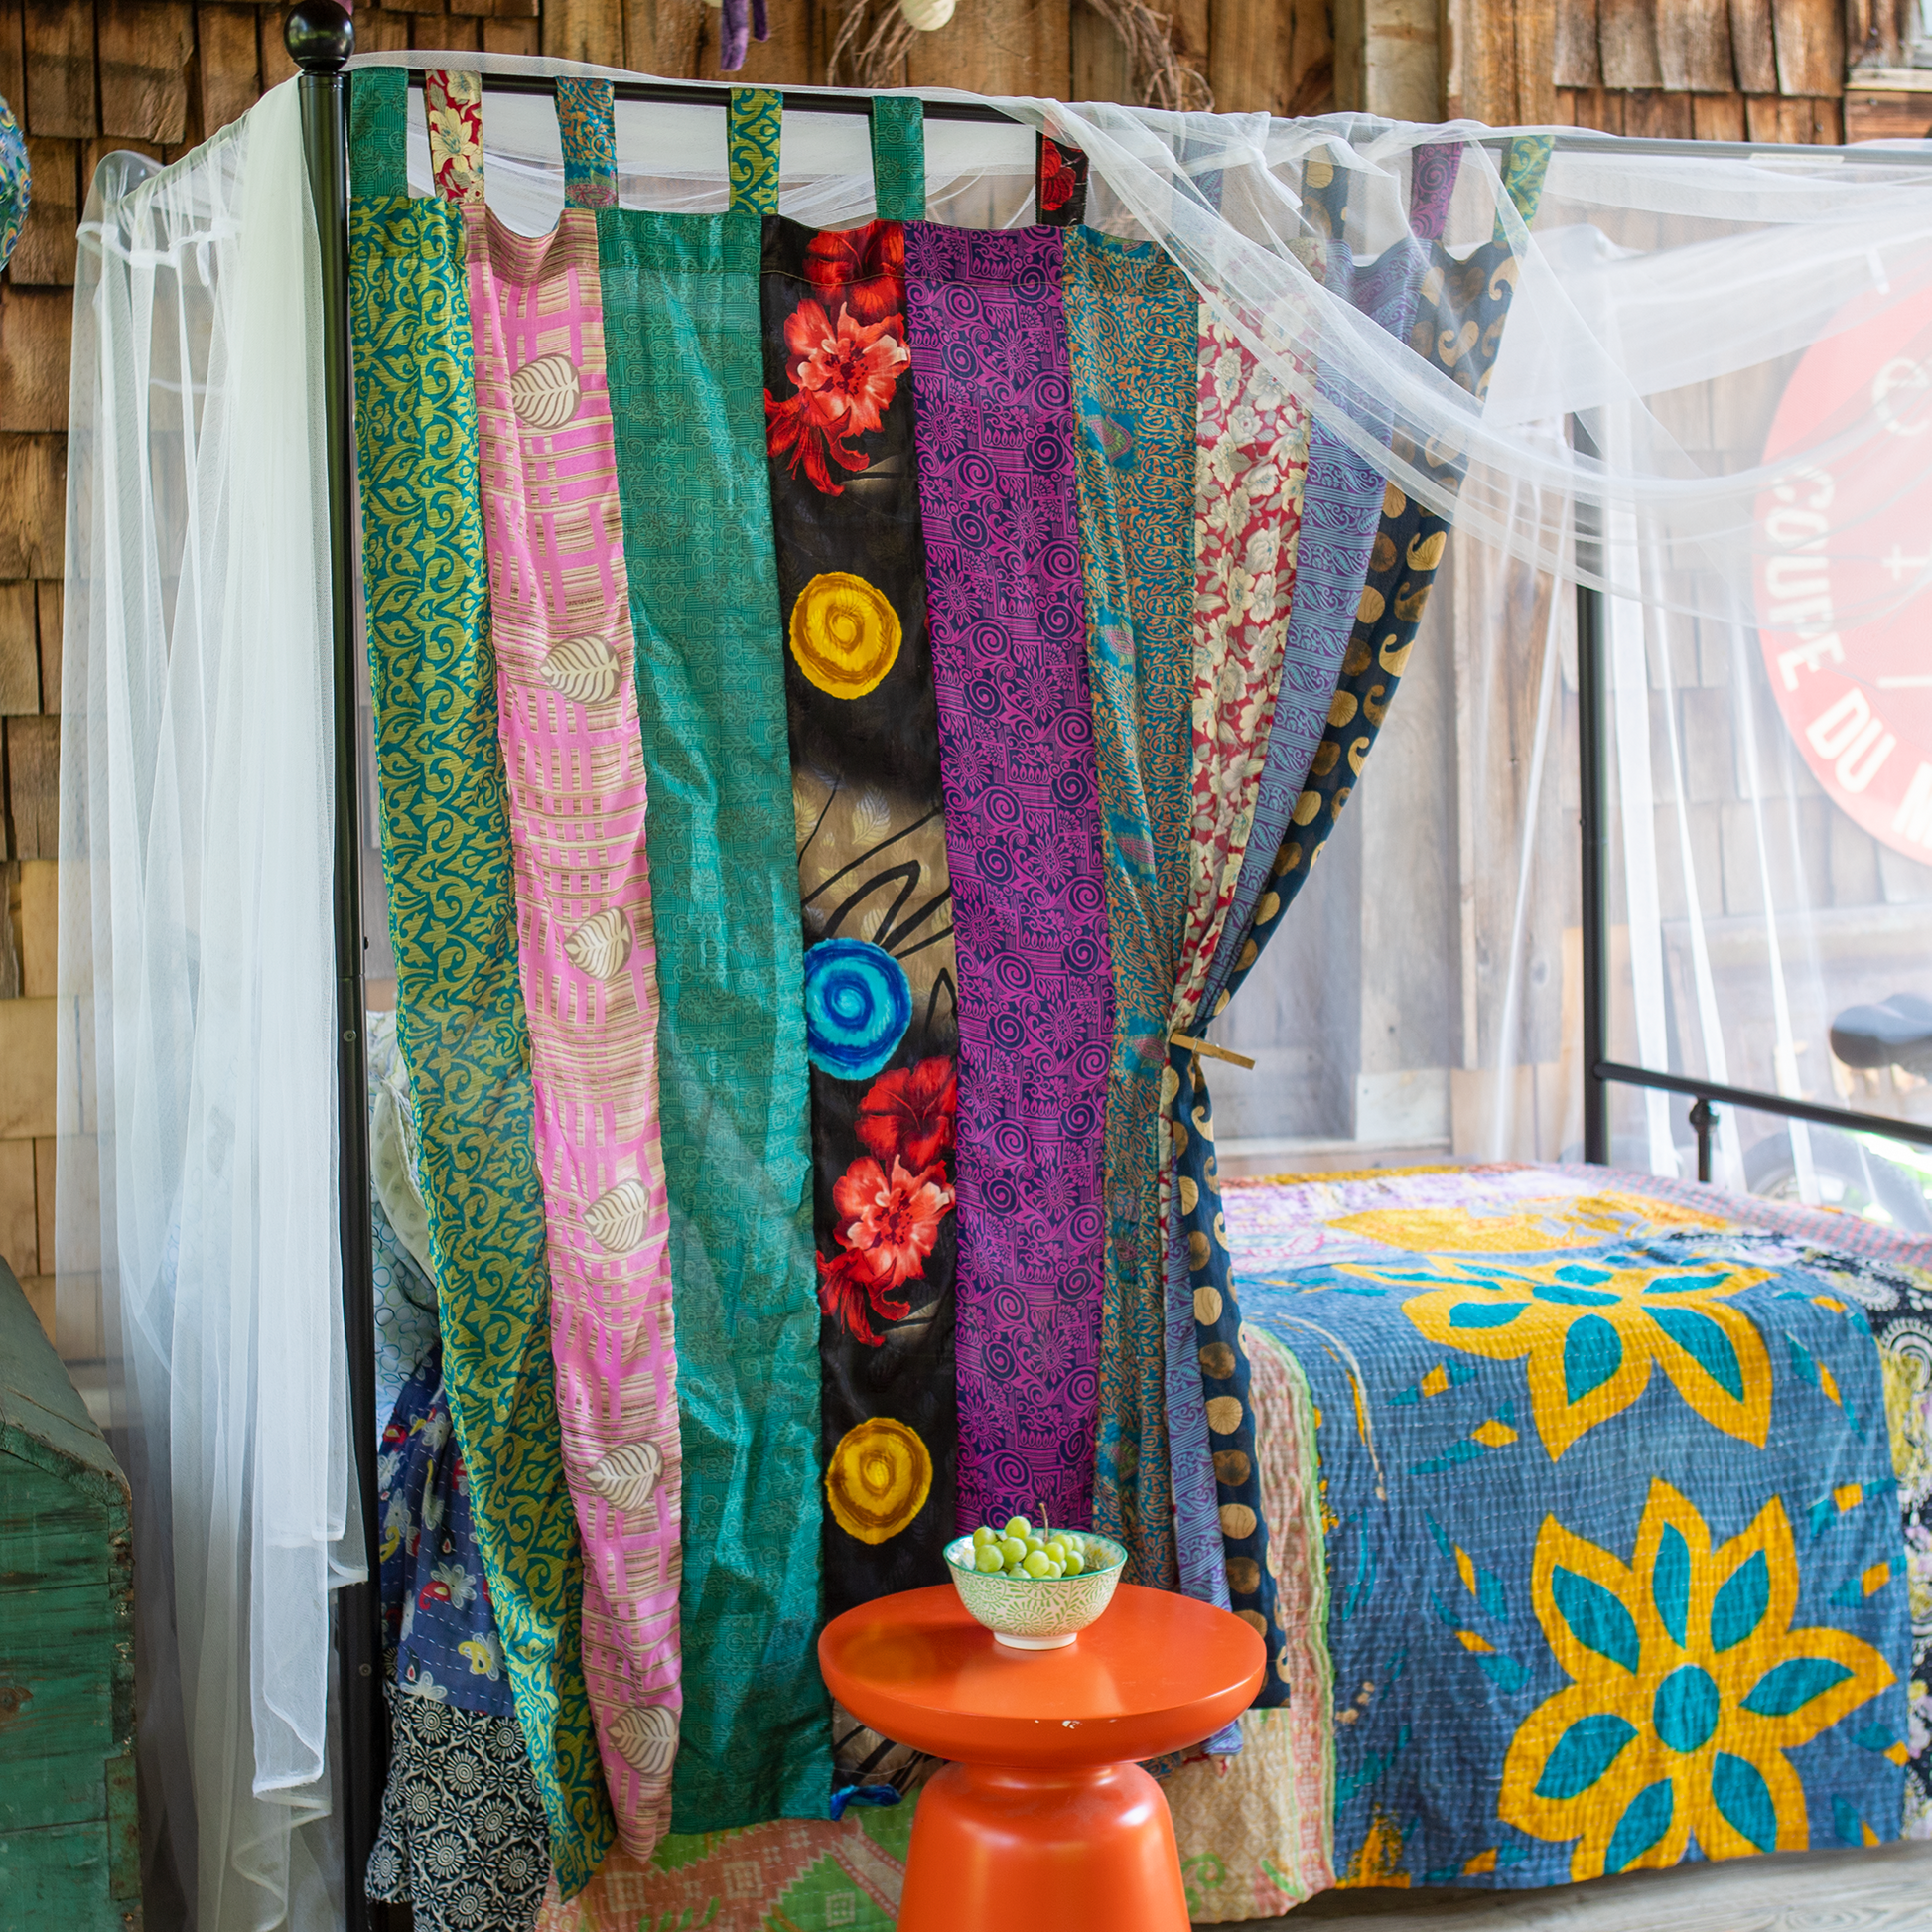 Canopy bed with a one of a kind recycled sari drape hung on it